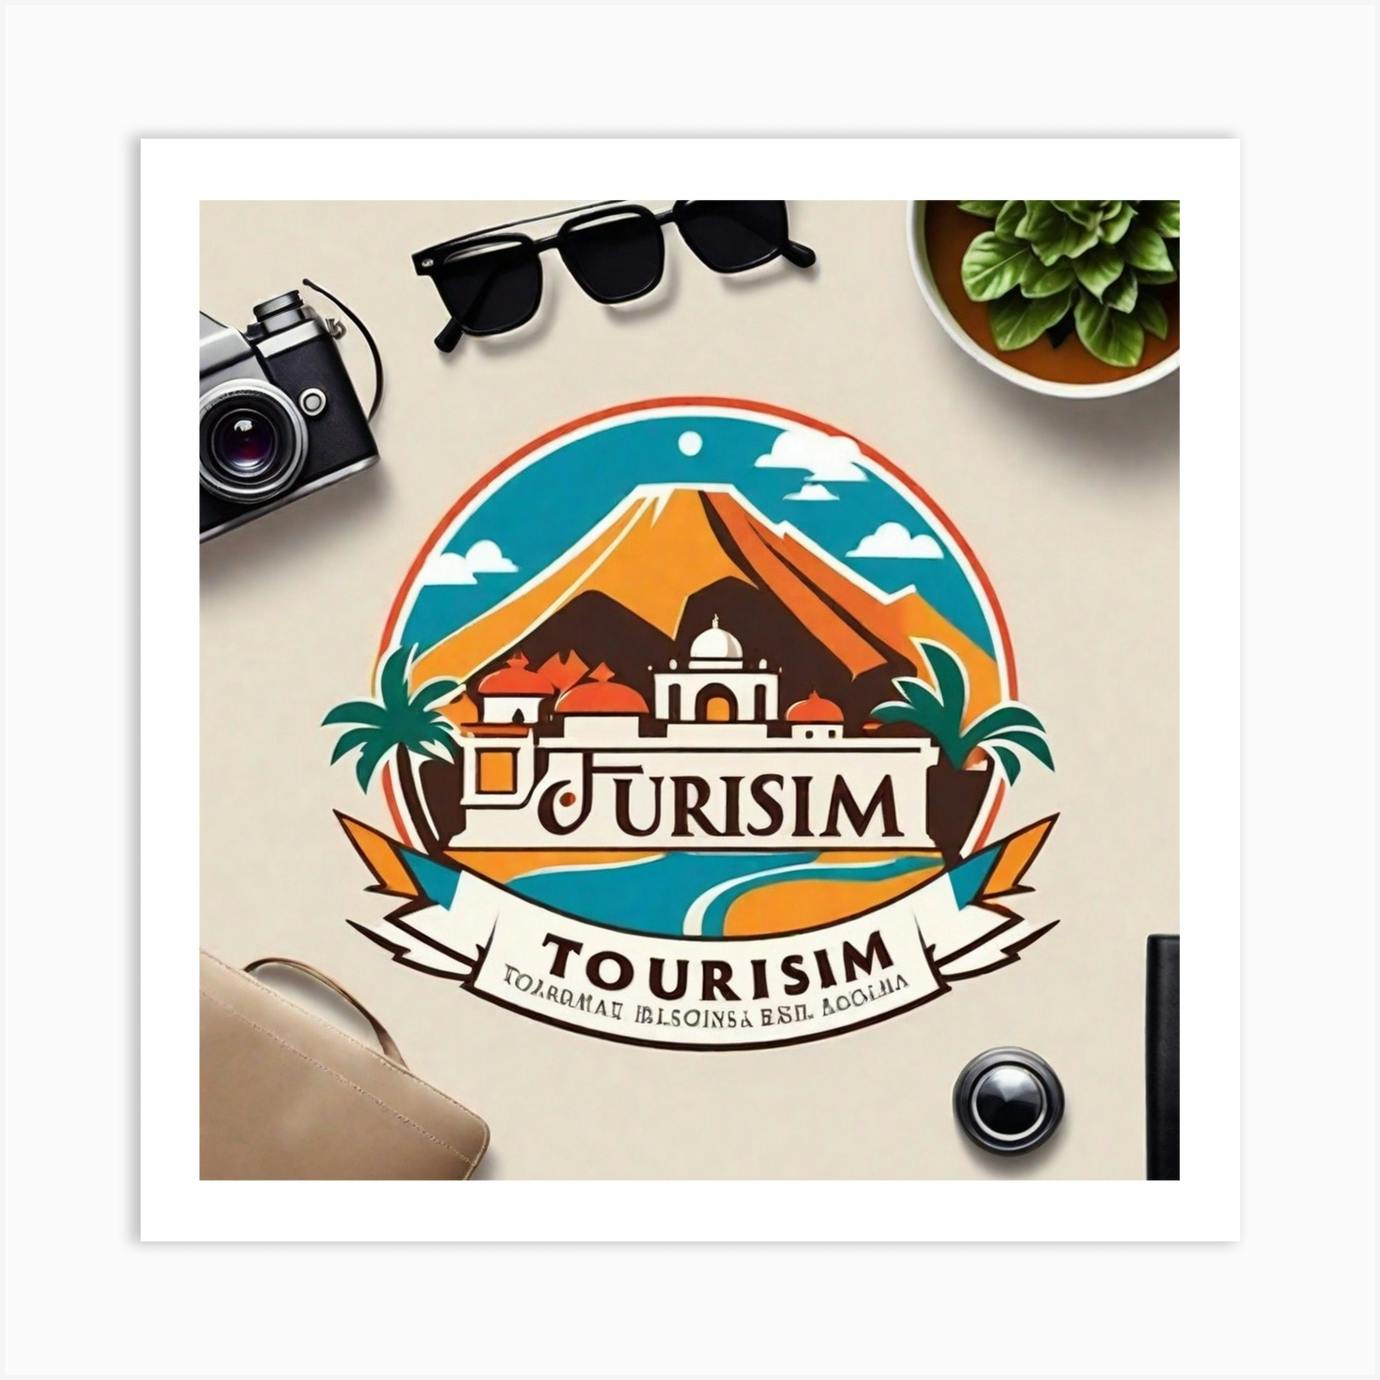 TRAVEL & TOURISM LOGO Template | PosterMyWall